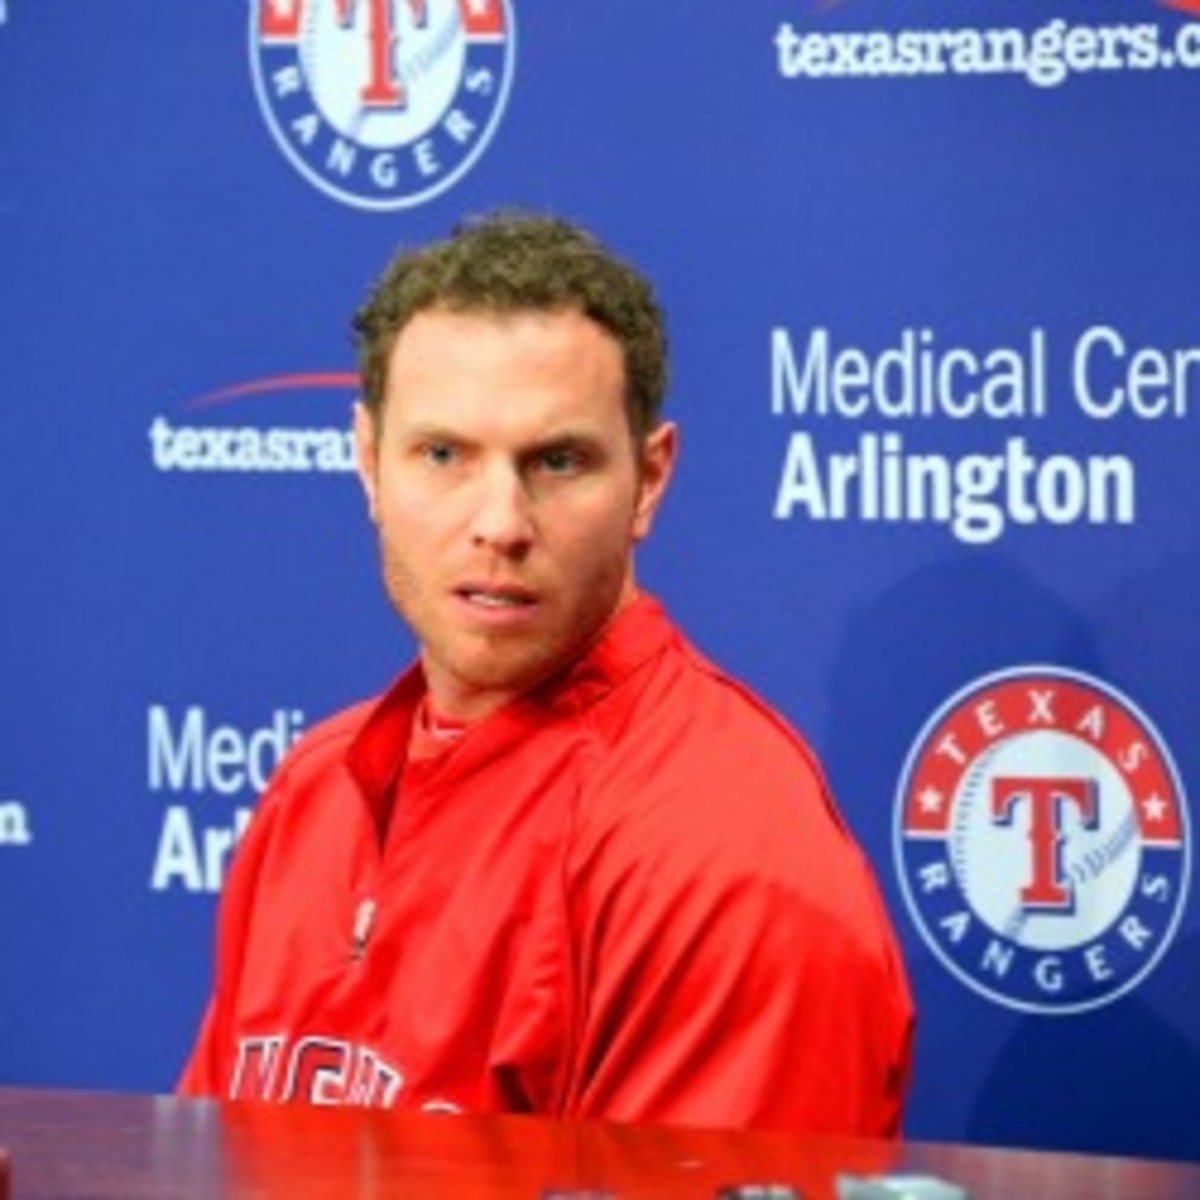 Angels outfielder Josh Hamilton was loudly booed during his return to Rangers Ballpark in Arlington on Friday. (Rick Yeatts/Getty Images)